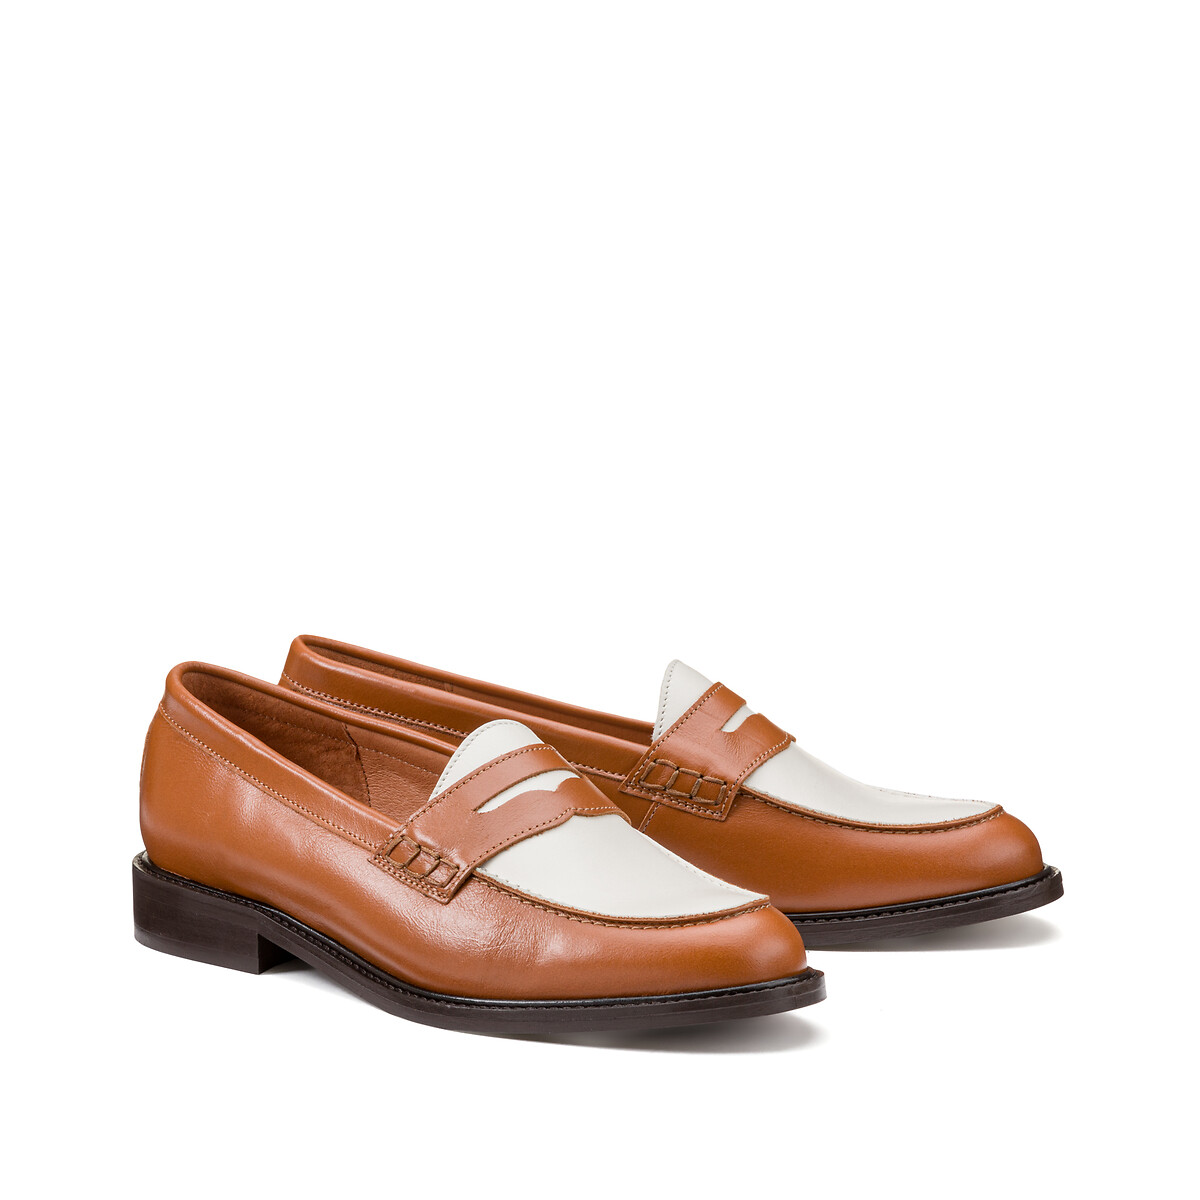 La Redoute, Two-Tone Leather Loafers